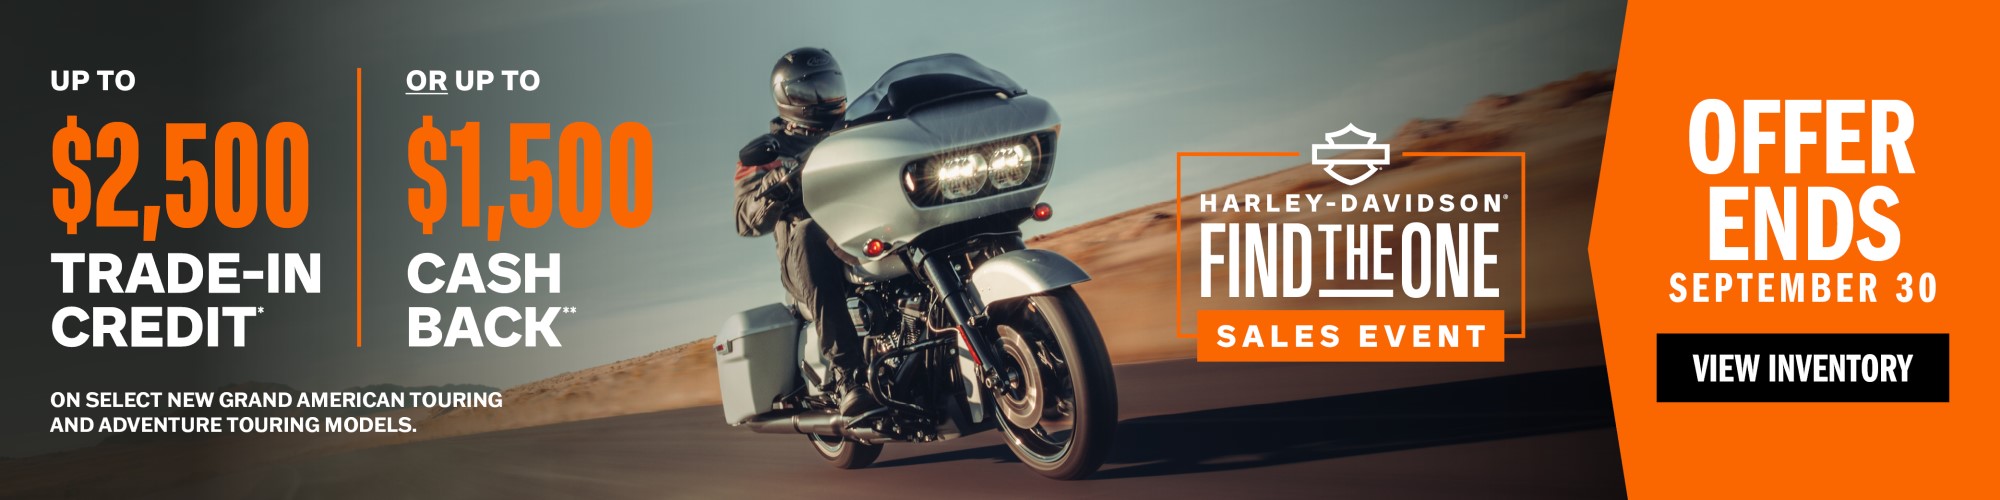 Find the One - 202319 at East Bay Harley-Davidson